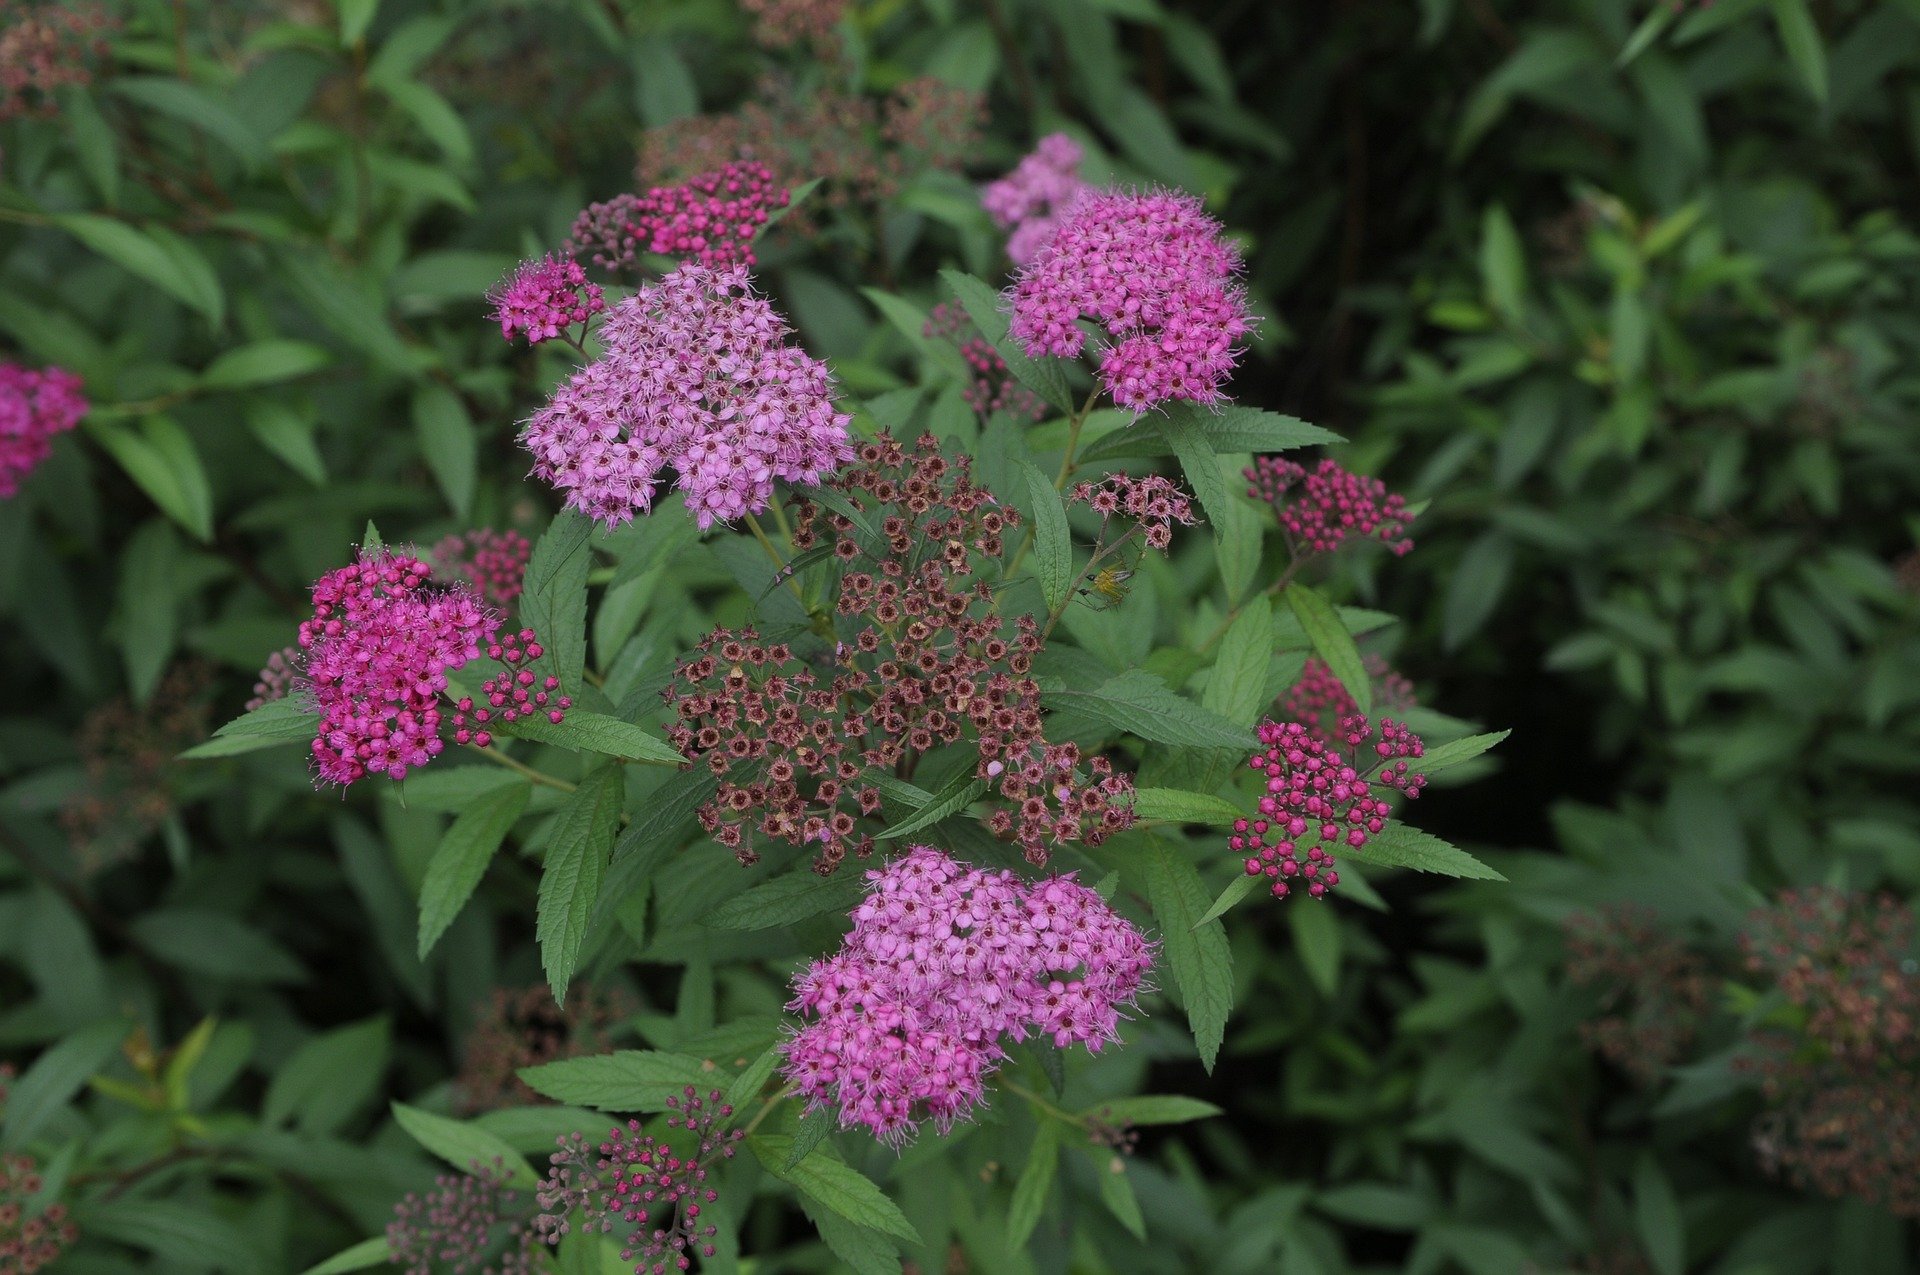  The pink-purple flowers show well against chatreuse foliage. 